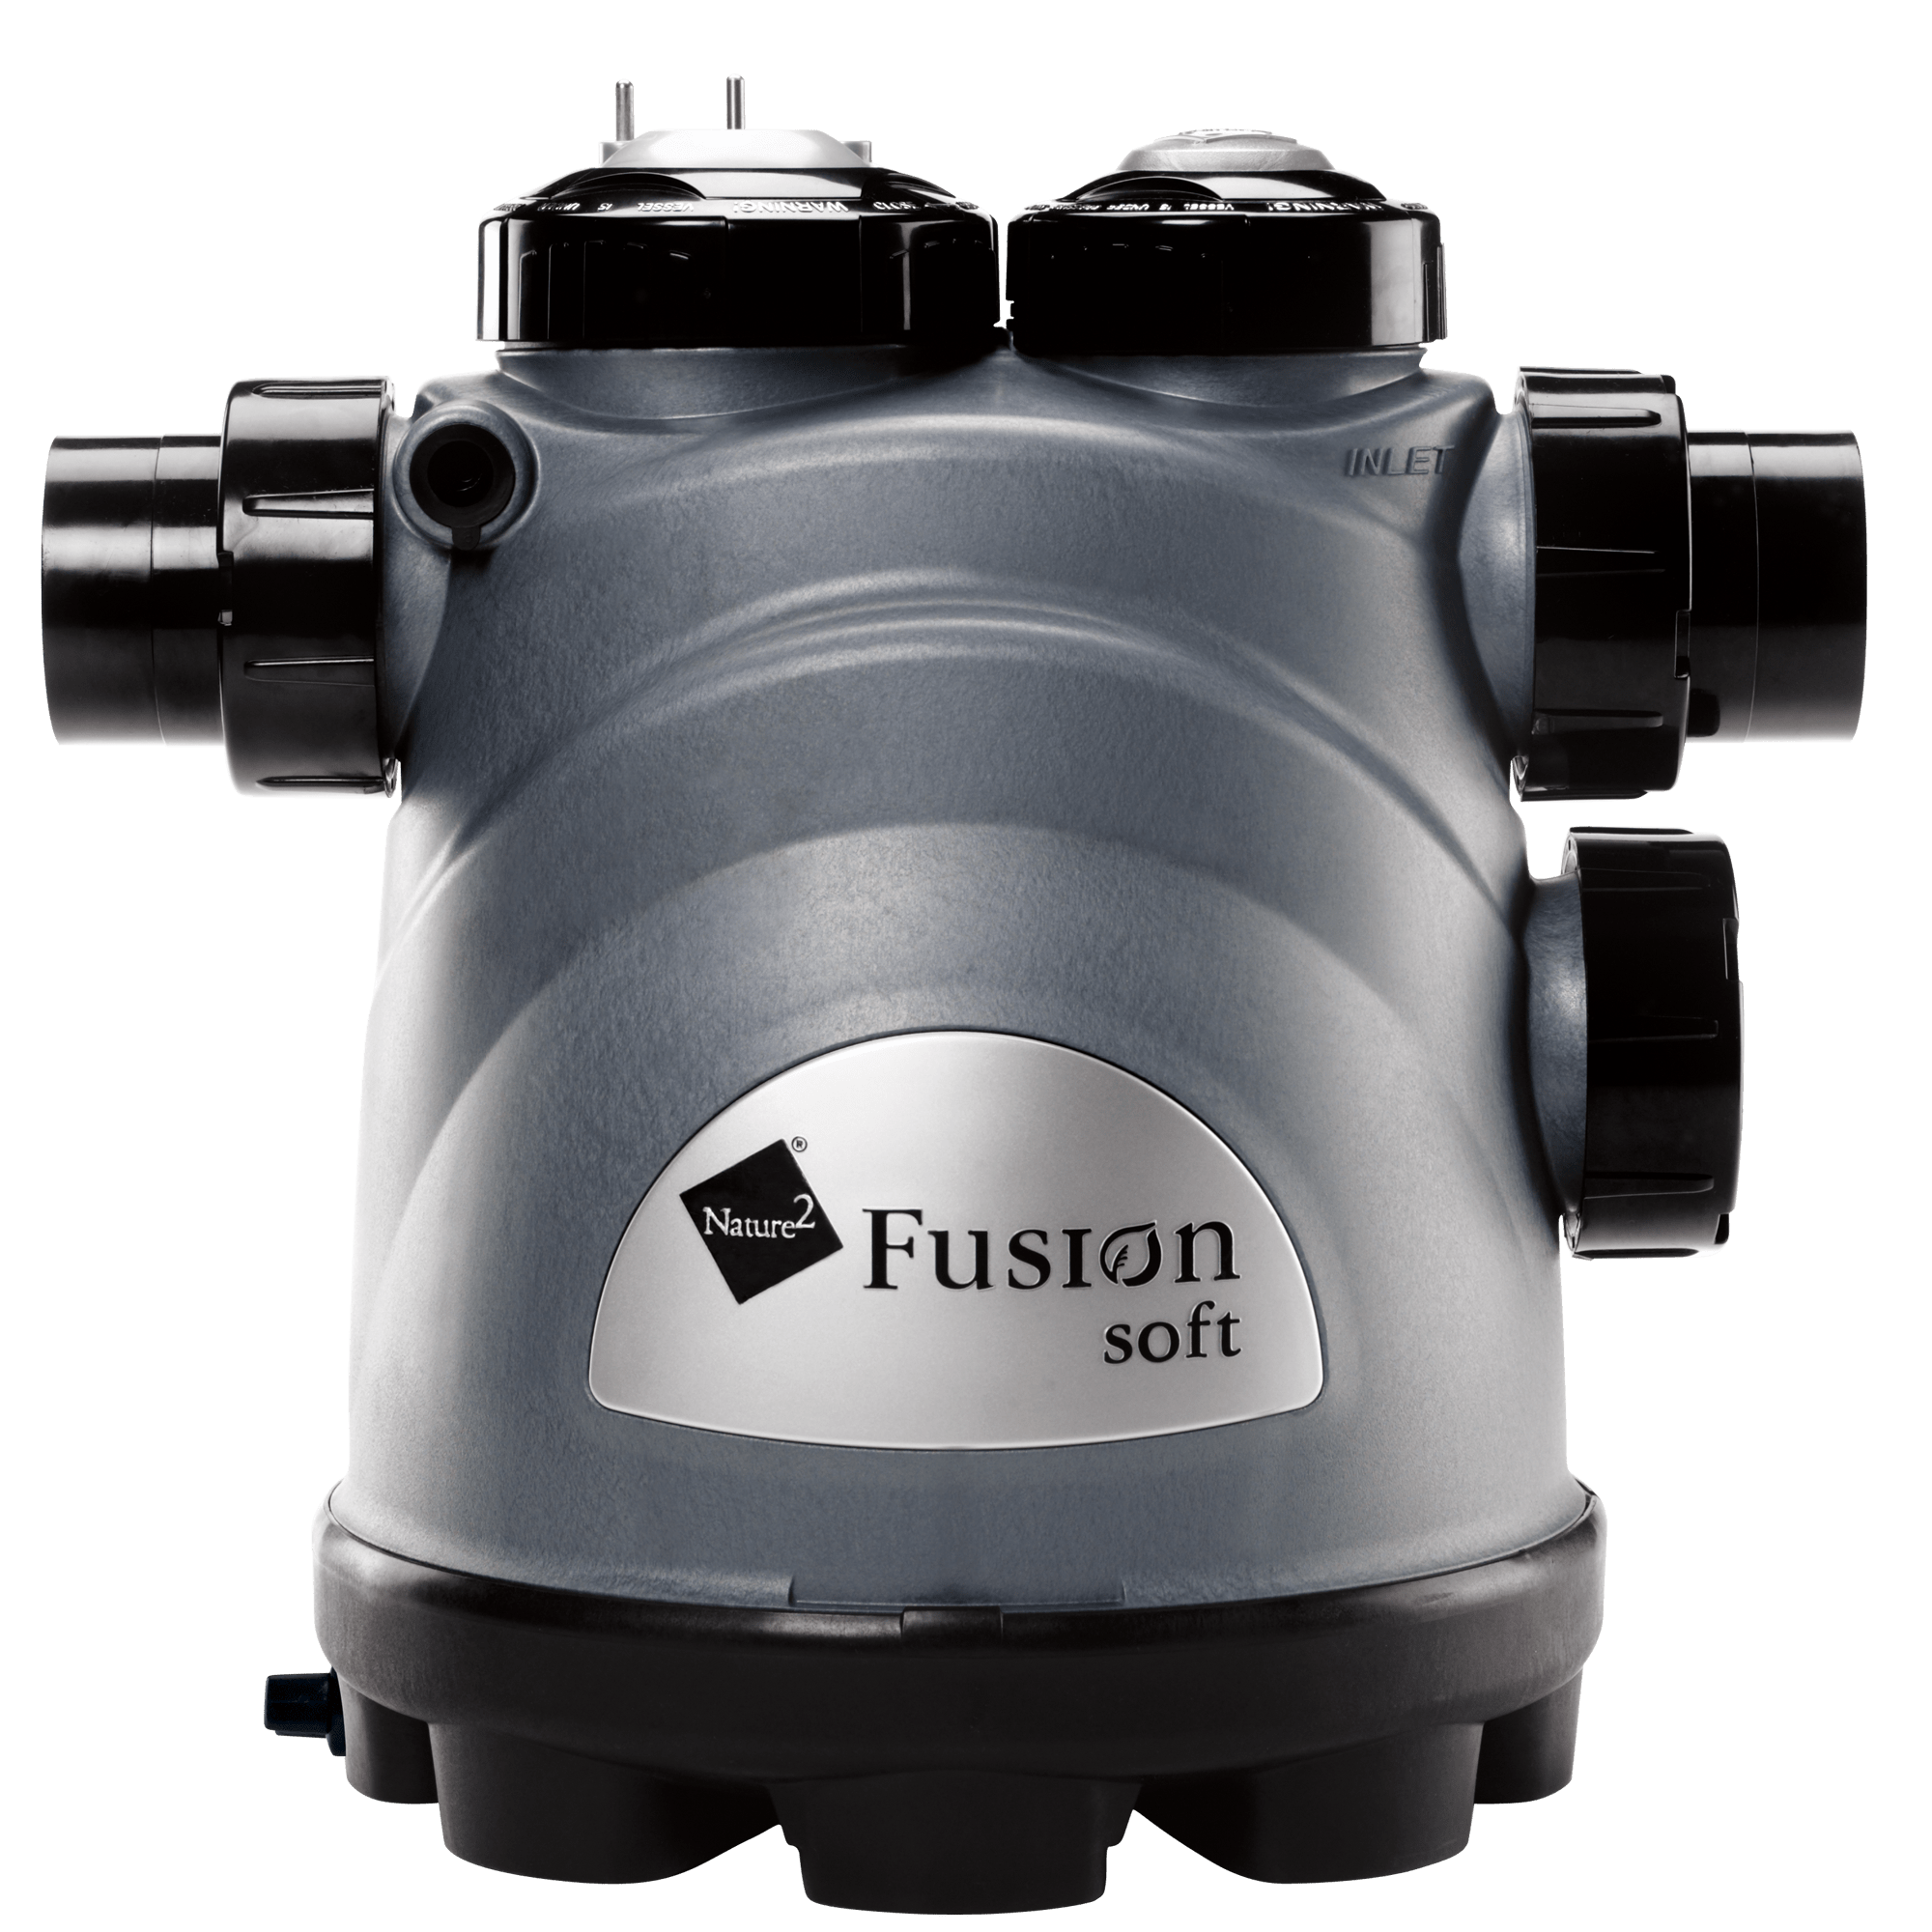 Nature2 Fusion Soft Water Purification System